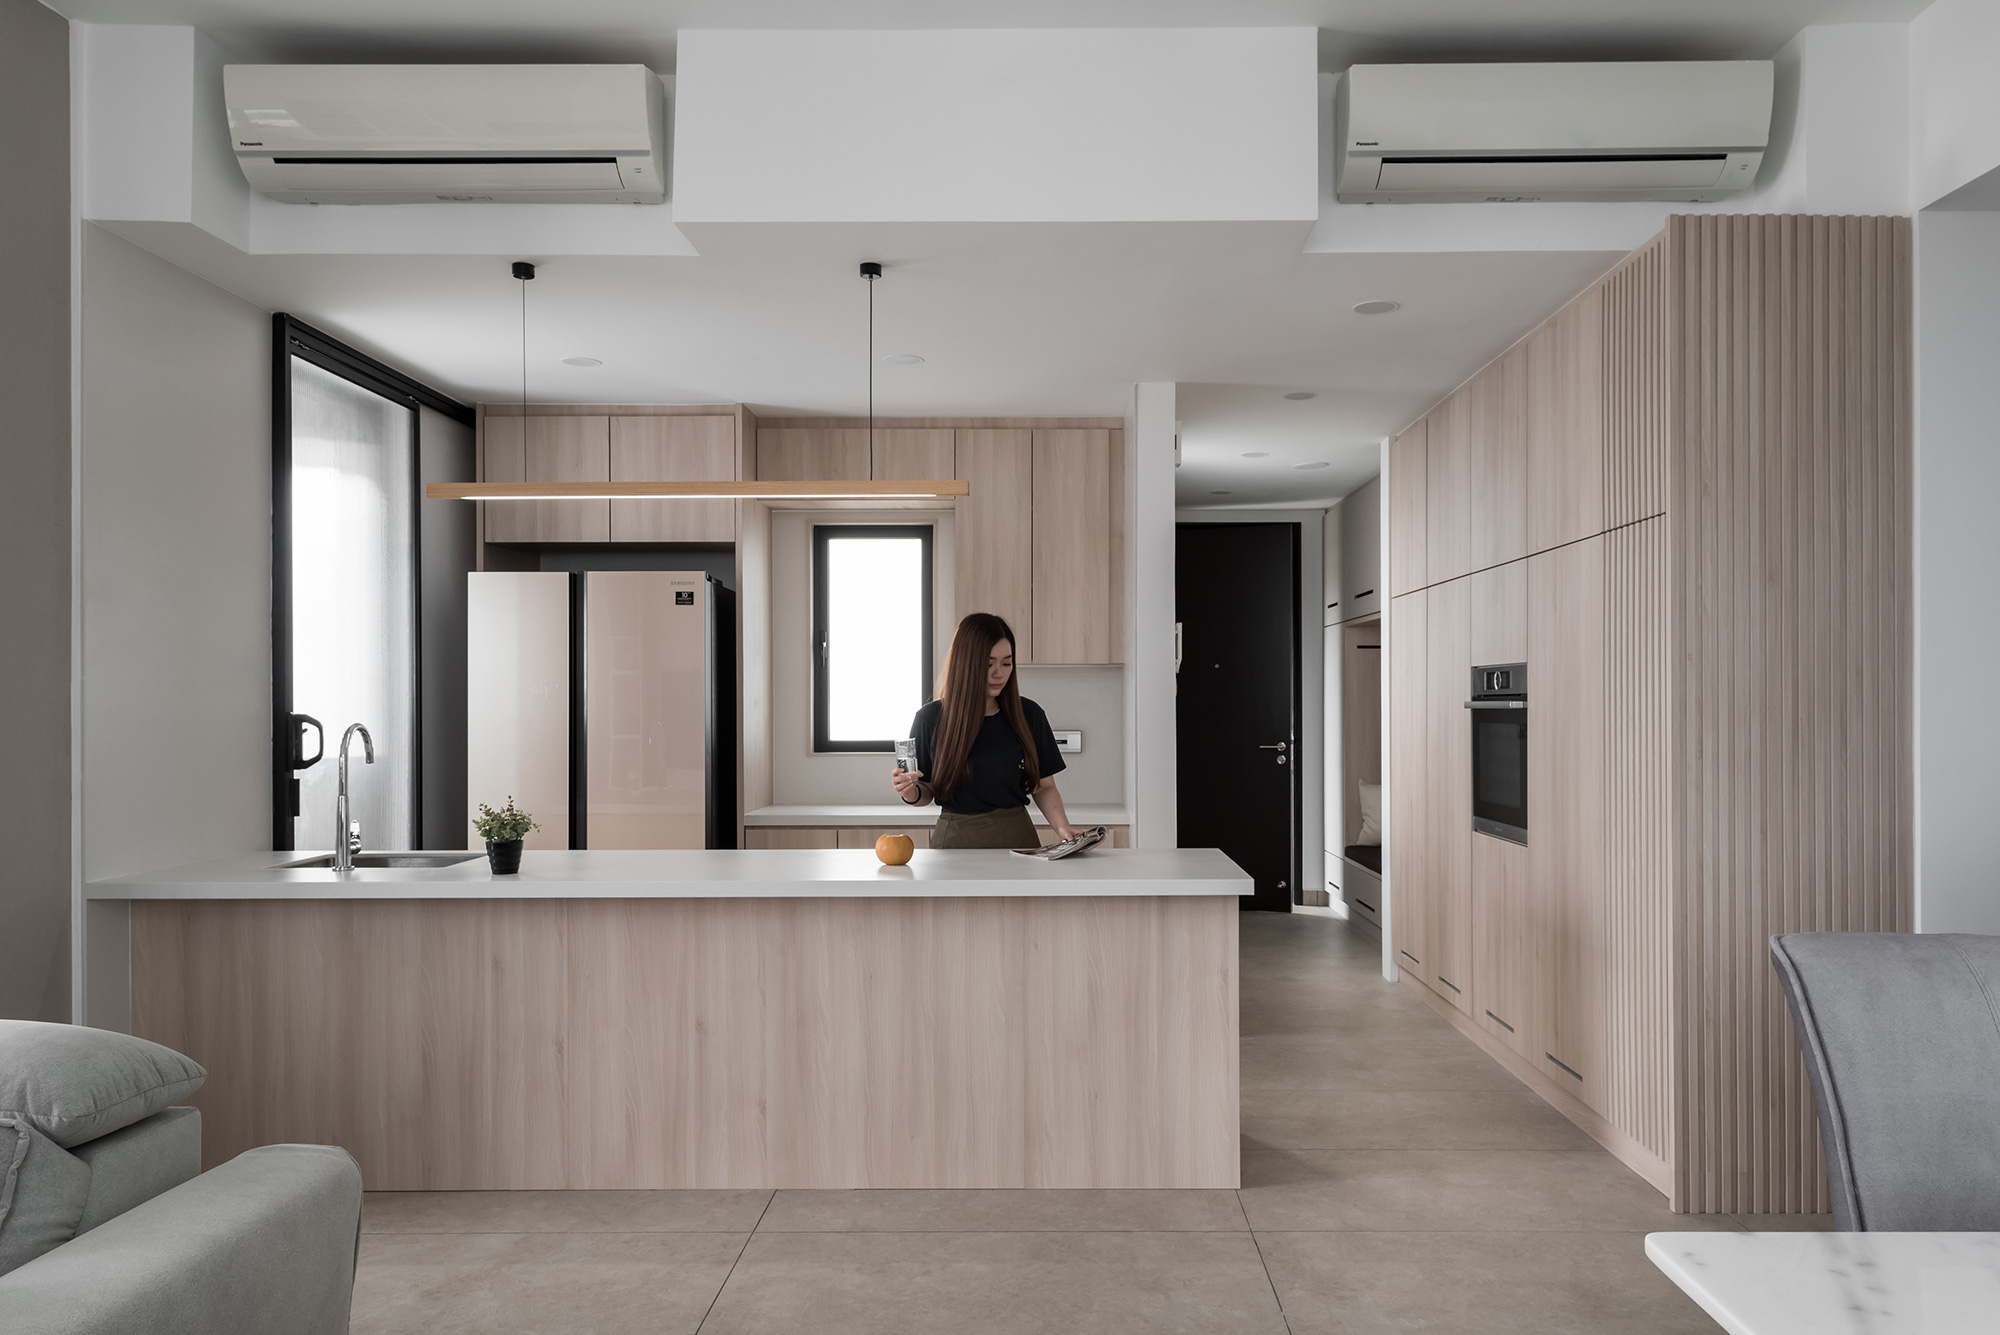 Image of Tamarind Malasia 16 in A seaside flat with a relaxed atmosphere, which enhances the brightness thanks to the off-white tone of Dekton Nayla - Cosentino